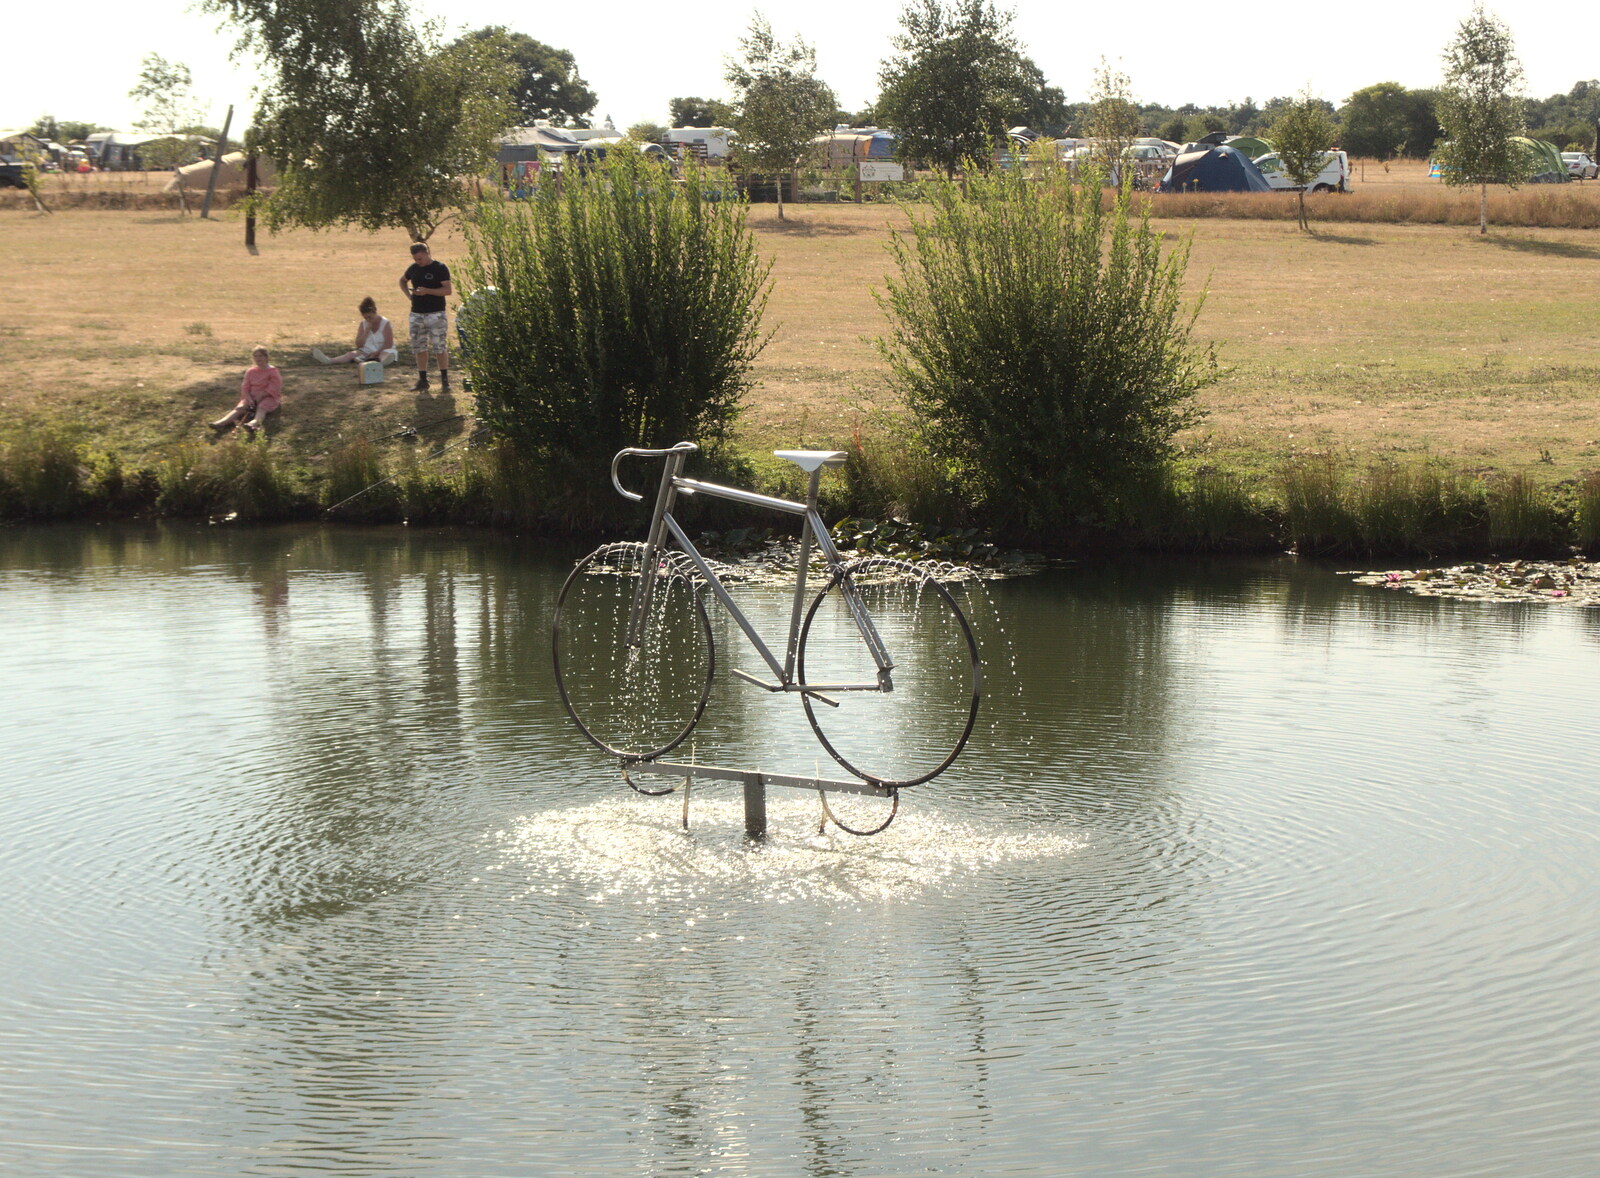 The campsite's café has a cool bicycle fountain from A Trip to Old Buckenham Airfield, Norfolk - 6th August 2022